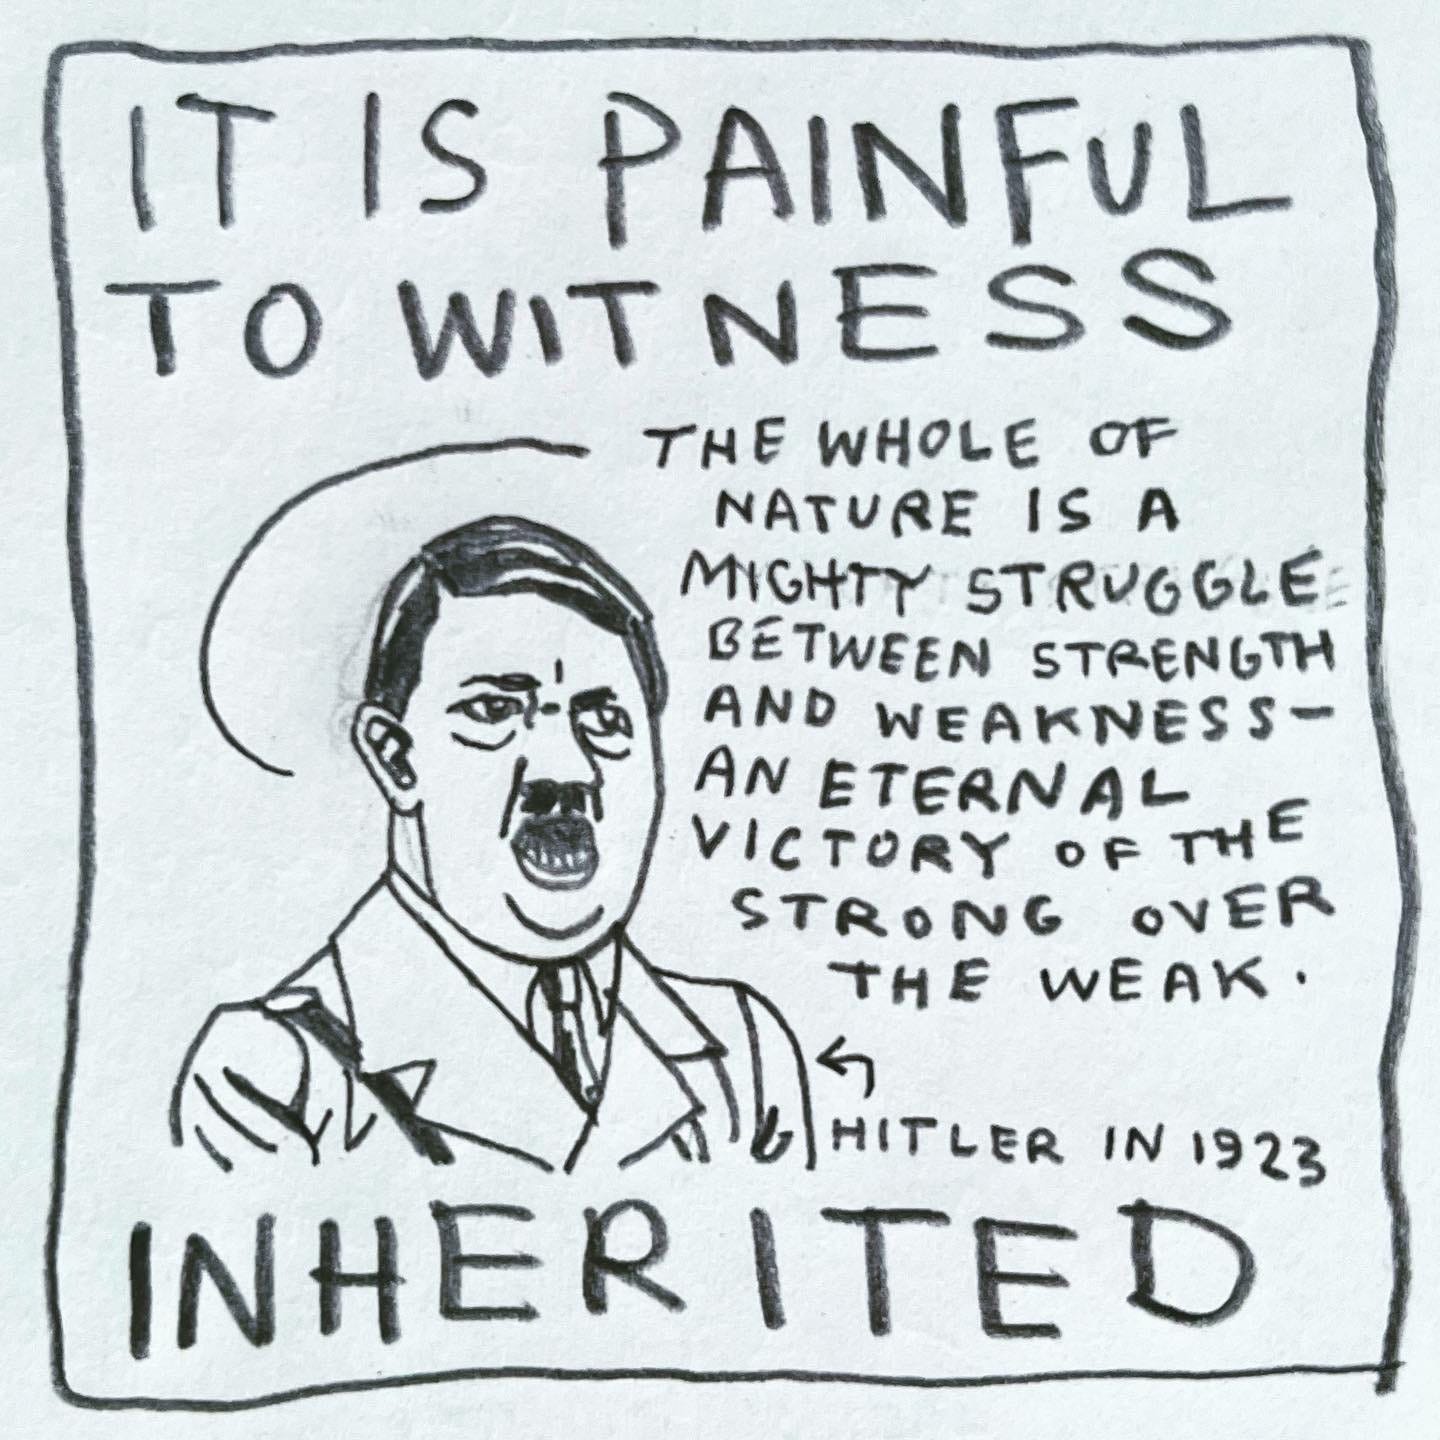 Panel 2: It is painful to witness Image: A portrait of Hitler speaking, from the shoulders up, in uniform. An arrow pointing to him is labeled "Hitler in 1923.” He is saying, “The whole of nature is a mighty struggle between strength and weakness - an eternal victory of the strong over the weak.”